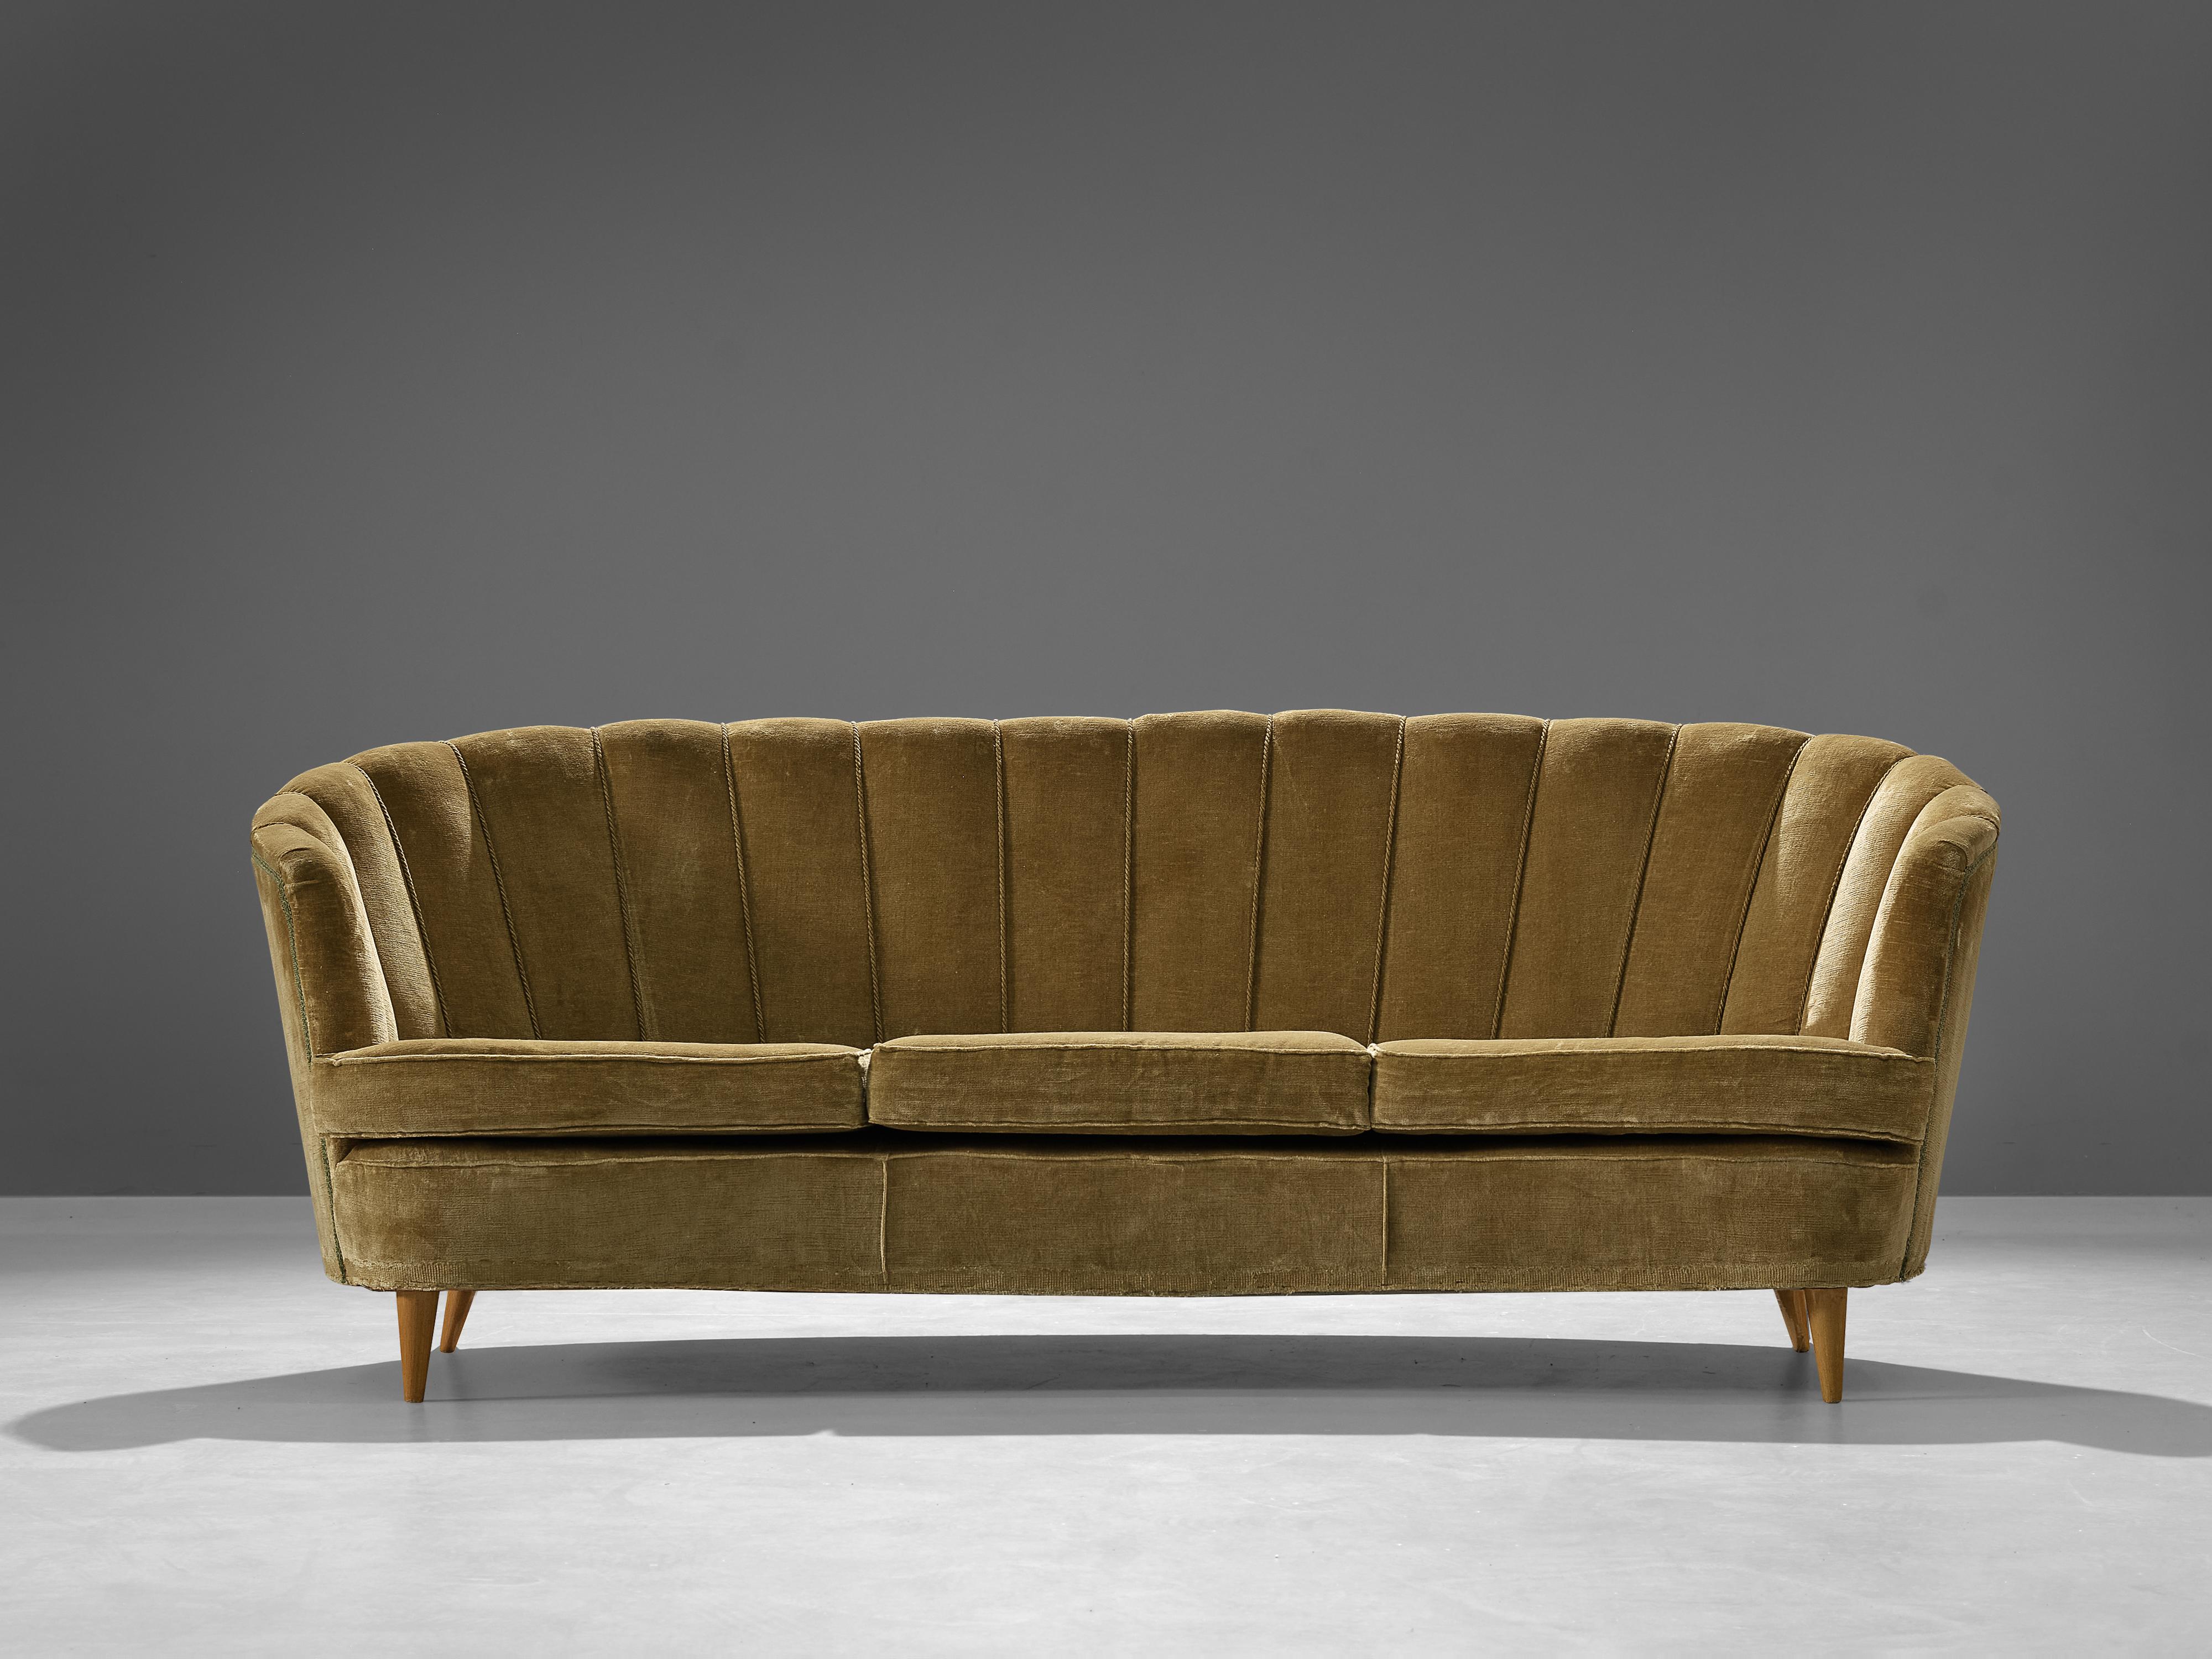 Banana sofa, upholstery, wood, Denmark, 1940s.

This voluptuous sofa is executed in a golden coloured velvet with wooden legs. The sofa has a high lined and curved back. The backrest is curved and flows over into armrests. The defined lines that